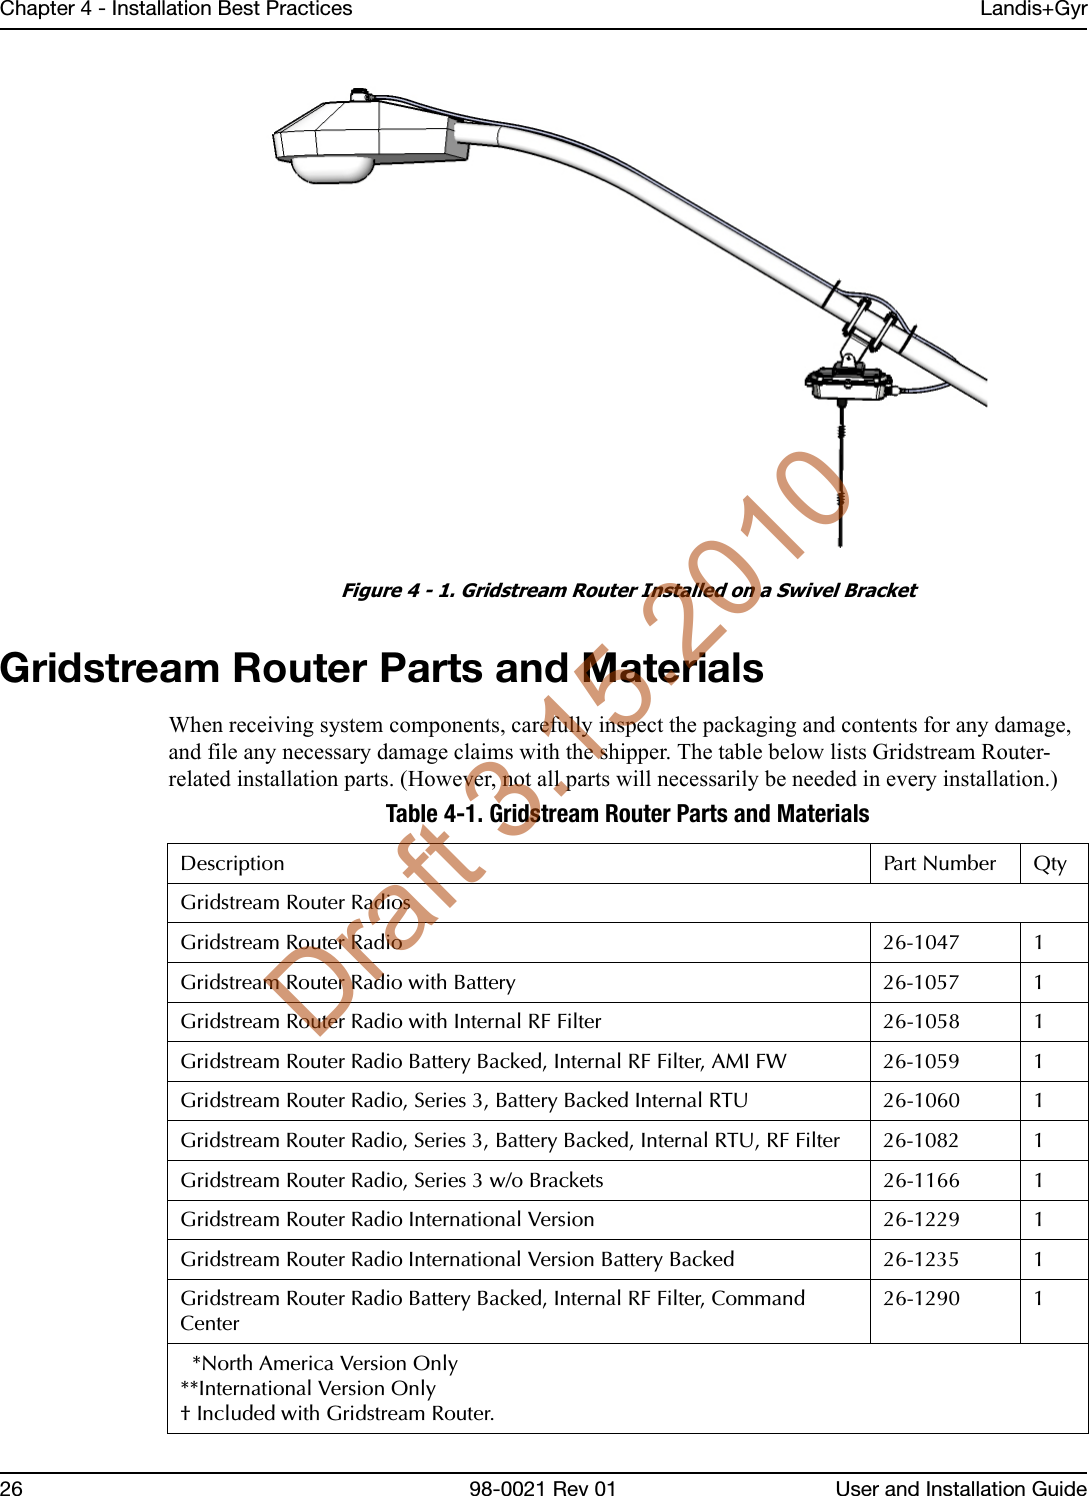 Chapter 4 - Installation Best Practices Landis+Gyr26 98-0021 Rev 01 User and Installation GuideFigure 4 - 1. Gridstream Router Installed on a Swivel BracketGridstream Router Parts and MaterialsWhen receiving system components, carefully inspect the packaging and contents for any damage, and file any necessary damage claims with the shipper. The table below lists Gridstream Router-related installation parts. (However, not all parts will necessarily be needed in every installation.)Table 4-1. Gridstream Router Parts and MaterialsDescription Part Number QtyGridstream Router RadiosGridstream Router Radio 26-1047 1Gridstream Router Radio with Battery 26-1057 1Gridstream Router Radio with Internal RF Filter 26-1058 1Gridstream Router Radio Battery Backed, Internal RF Filter, AMI FW 26-1059 1Gridstream Router Radio, Series 3, Battery Backed Internal RTU 26-1060 1Gridstream Router Radio, Series 3, Battery Backed, Internal RTU, RF Filter 26-1082 1Gridstream Router Radio, Series 3 w/o Brackets 26-1166 1Gridstream Router Radio International Version 26-1229 1Gridstream Router Radio International Version Battery Backed 26-1235 1Gridstream Router Radio Battery Backed, Internal RF Filter, Command Center26-1290 1  *North America Version Only**International Version Only† Included with Gridstream Router.Draft 3.15.2010